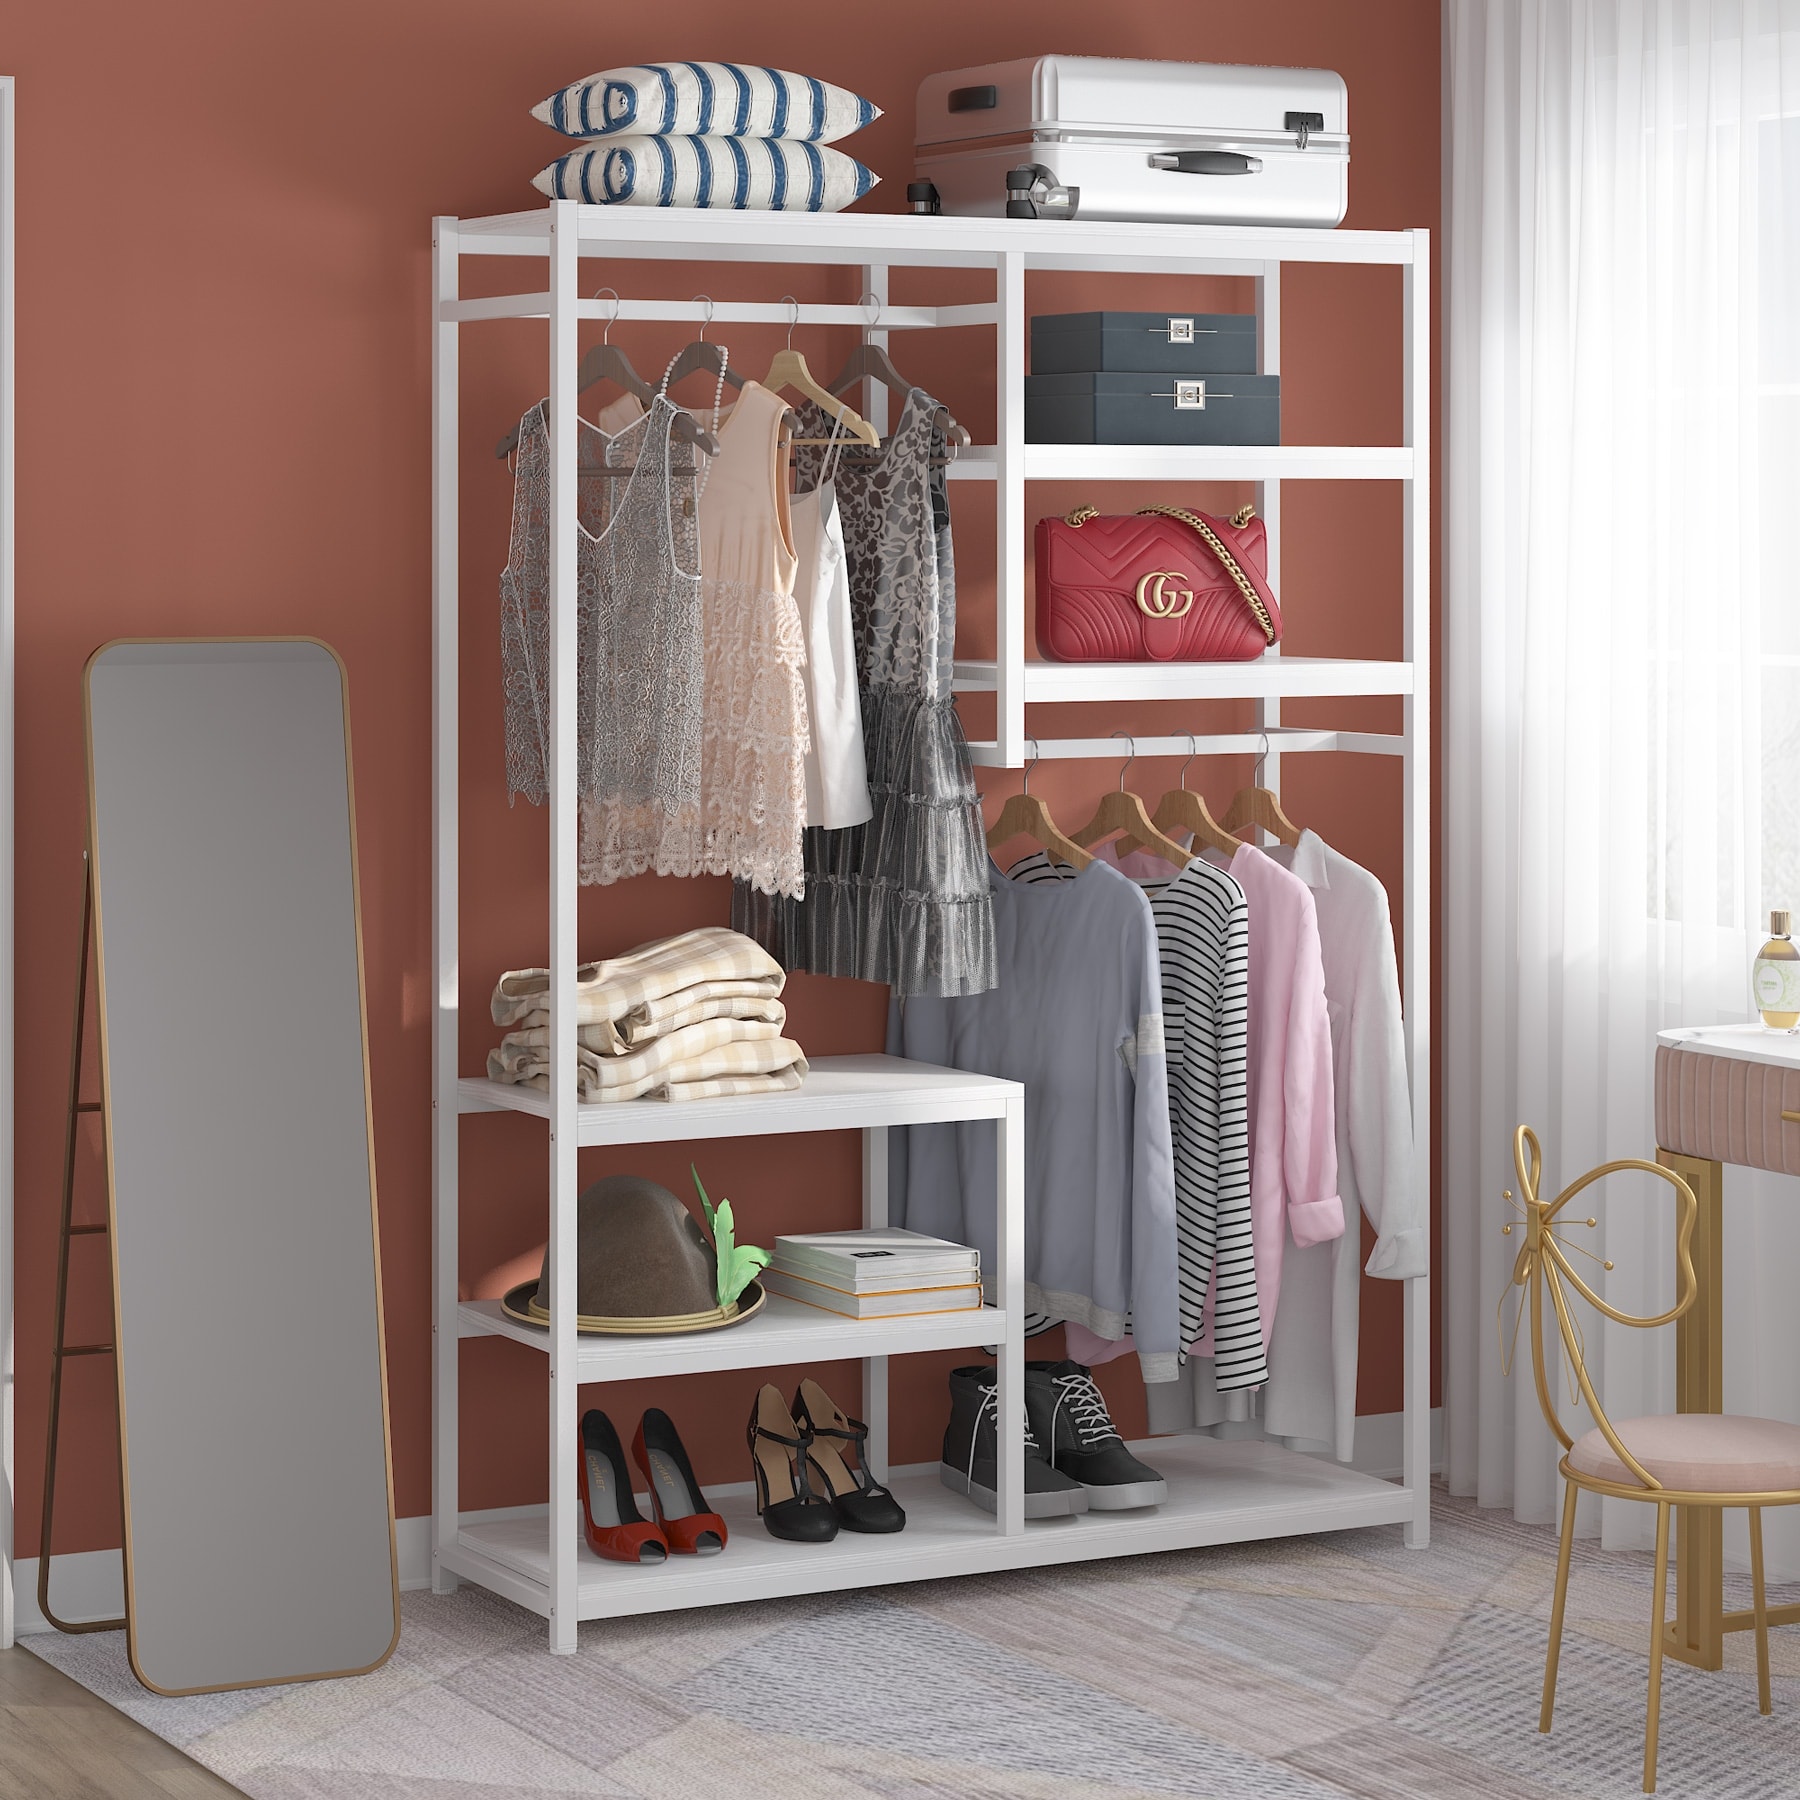 https://ak1.ostkcdn.com/images/products/is/images/direct/1ea56c40e639faab6304d9a61a50932f9b57583a/Large-closet-organizer-Double-Hanging-Rod-Clothes-Garment-Racks-with-Storage-Shelves.jpg